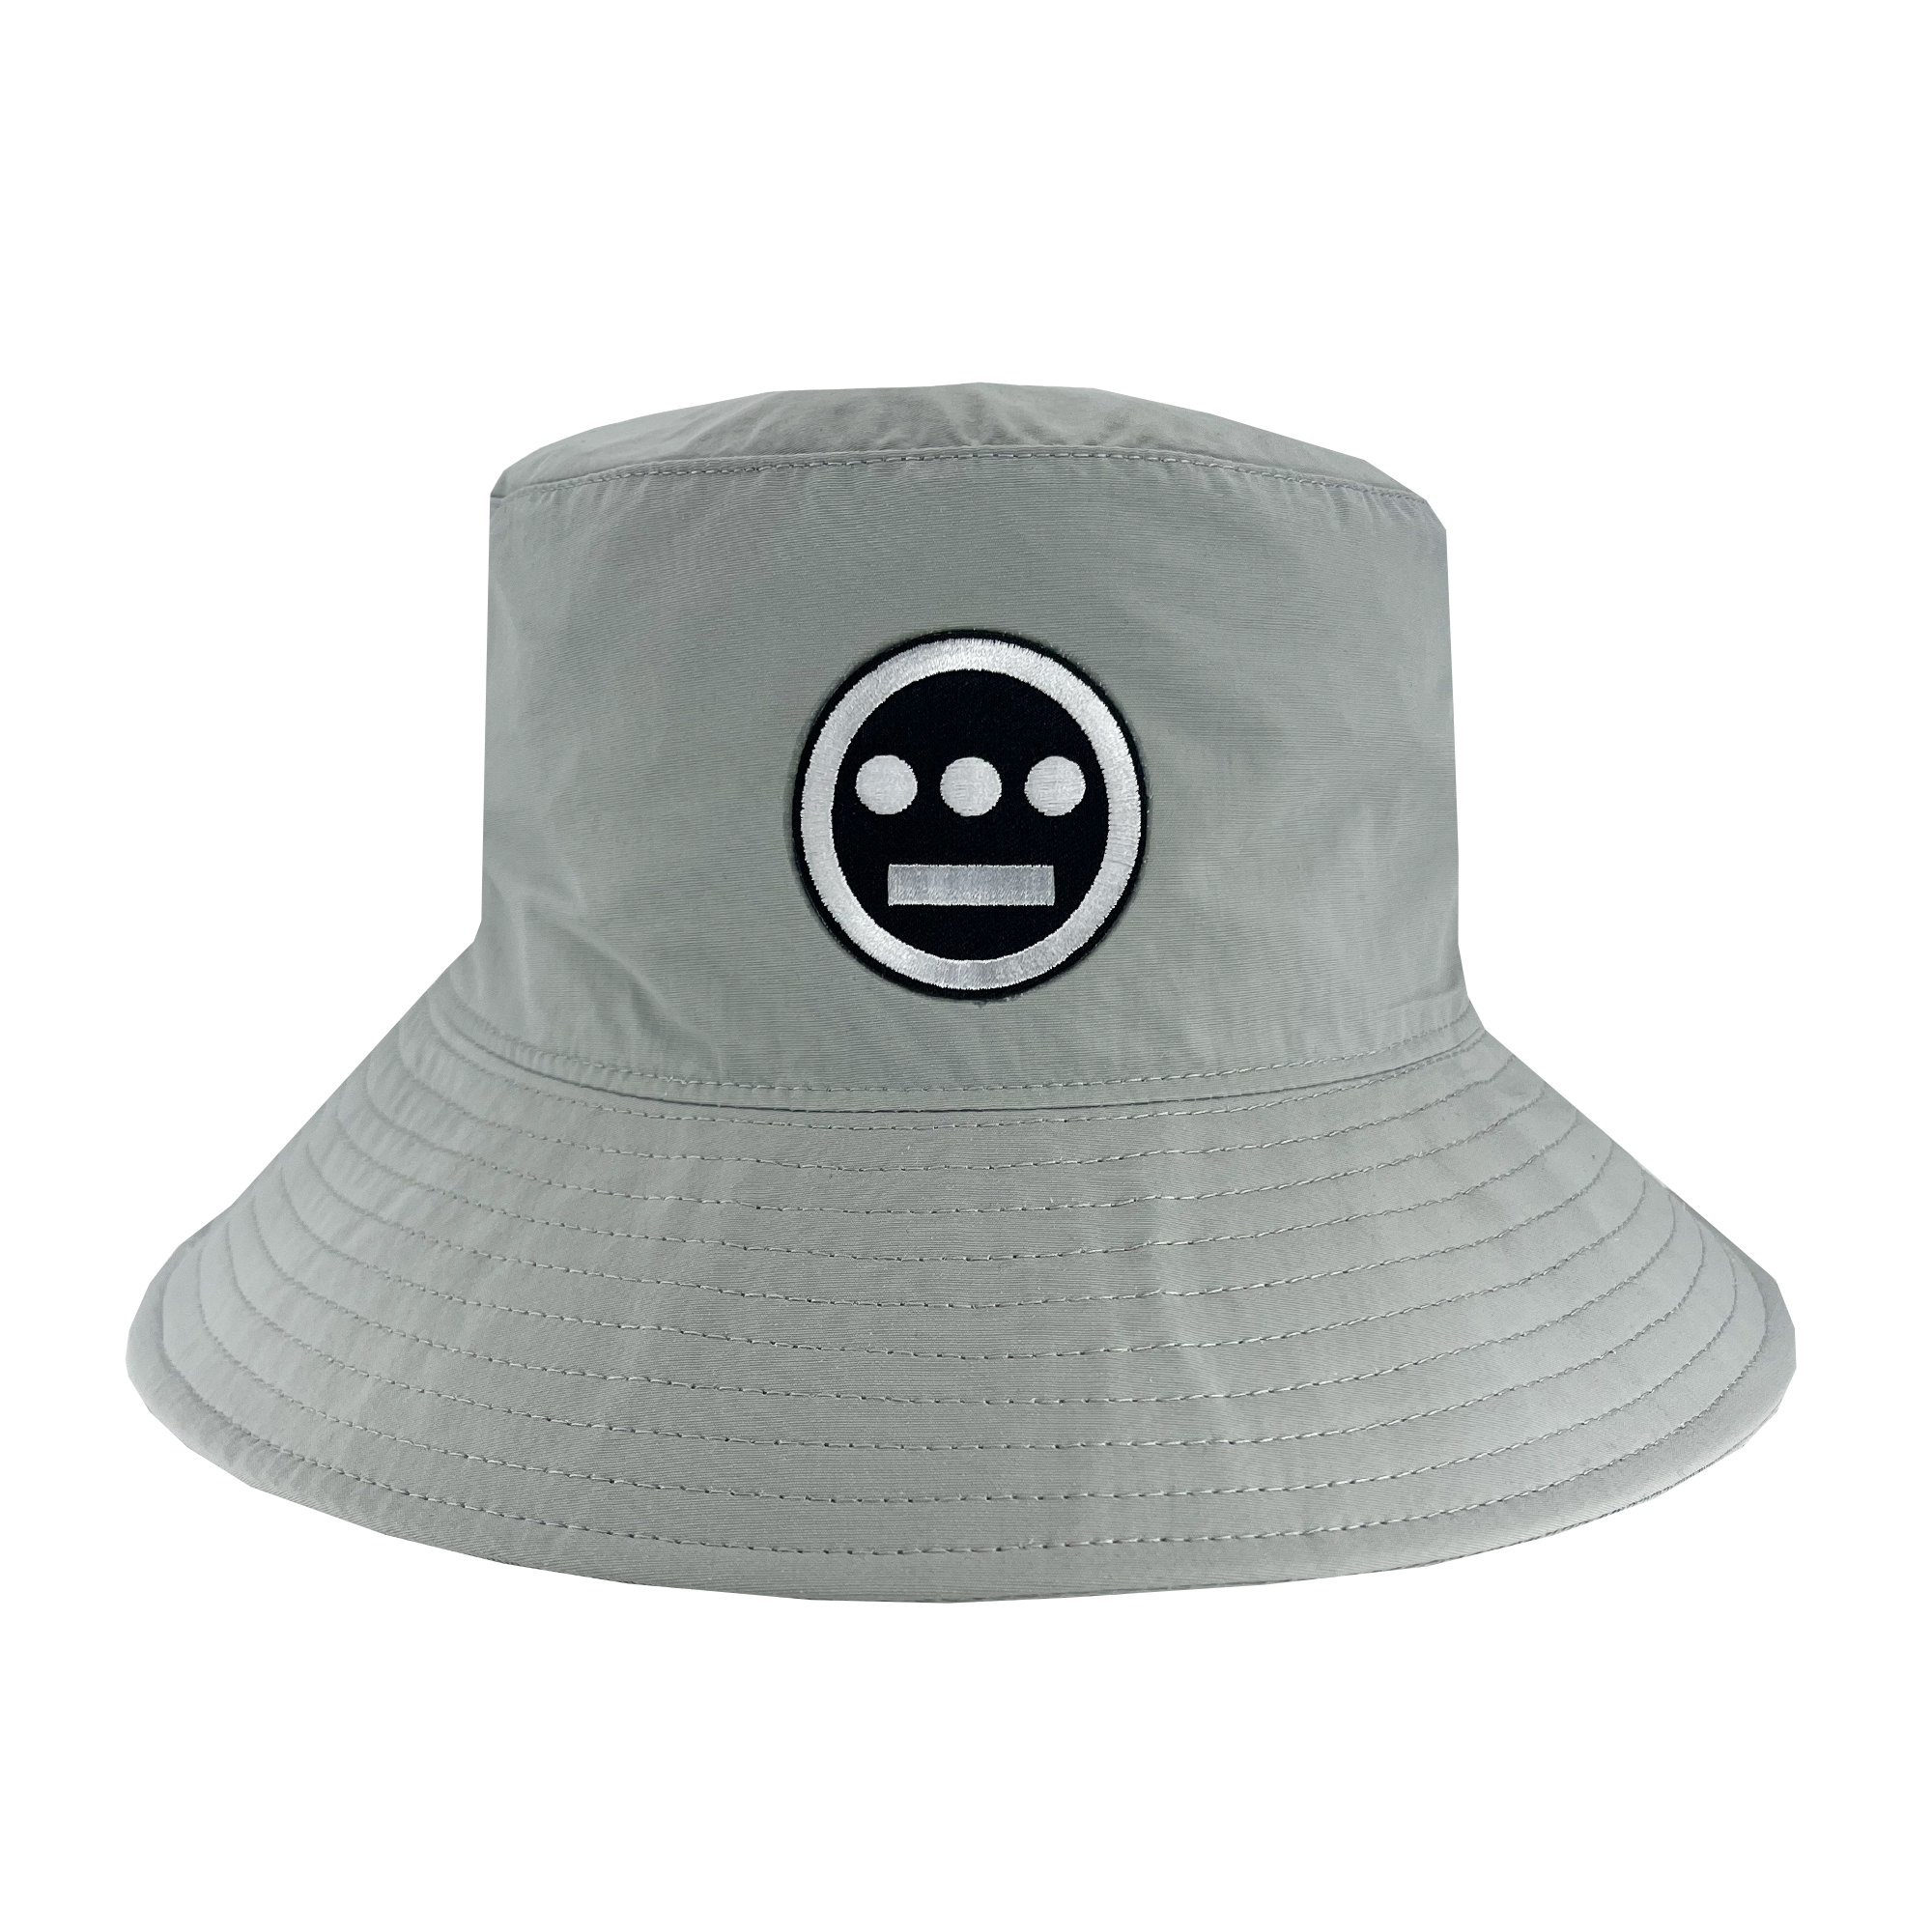 Wide brim grey bucket hat with toggles and Hiero logo patch .